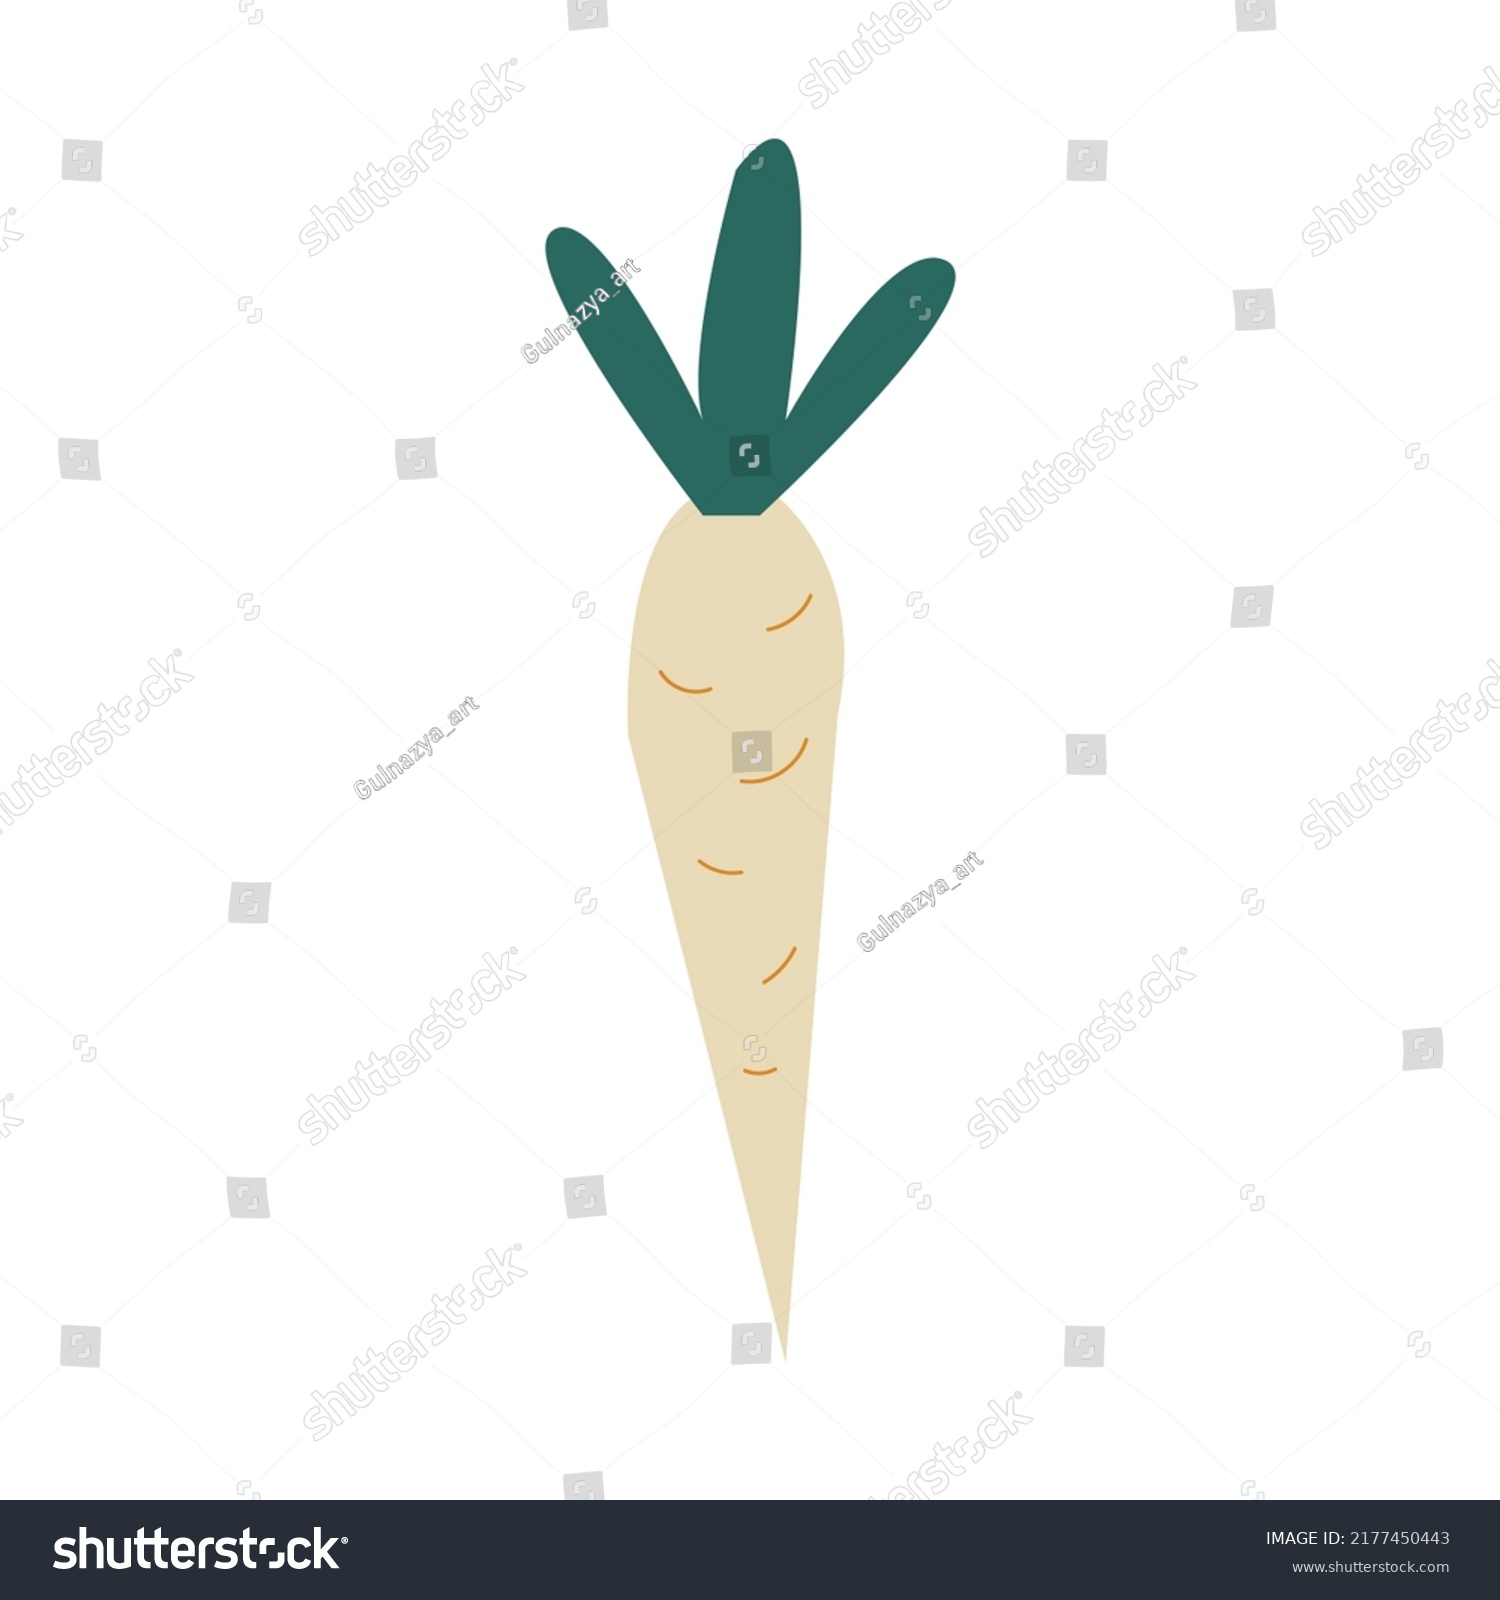 Daikon radish with green stem isolated vegetable root. Vector illustration. #2177450443